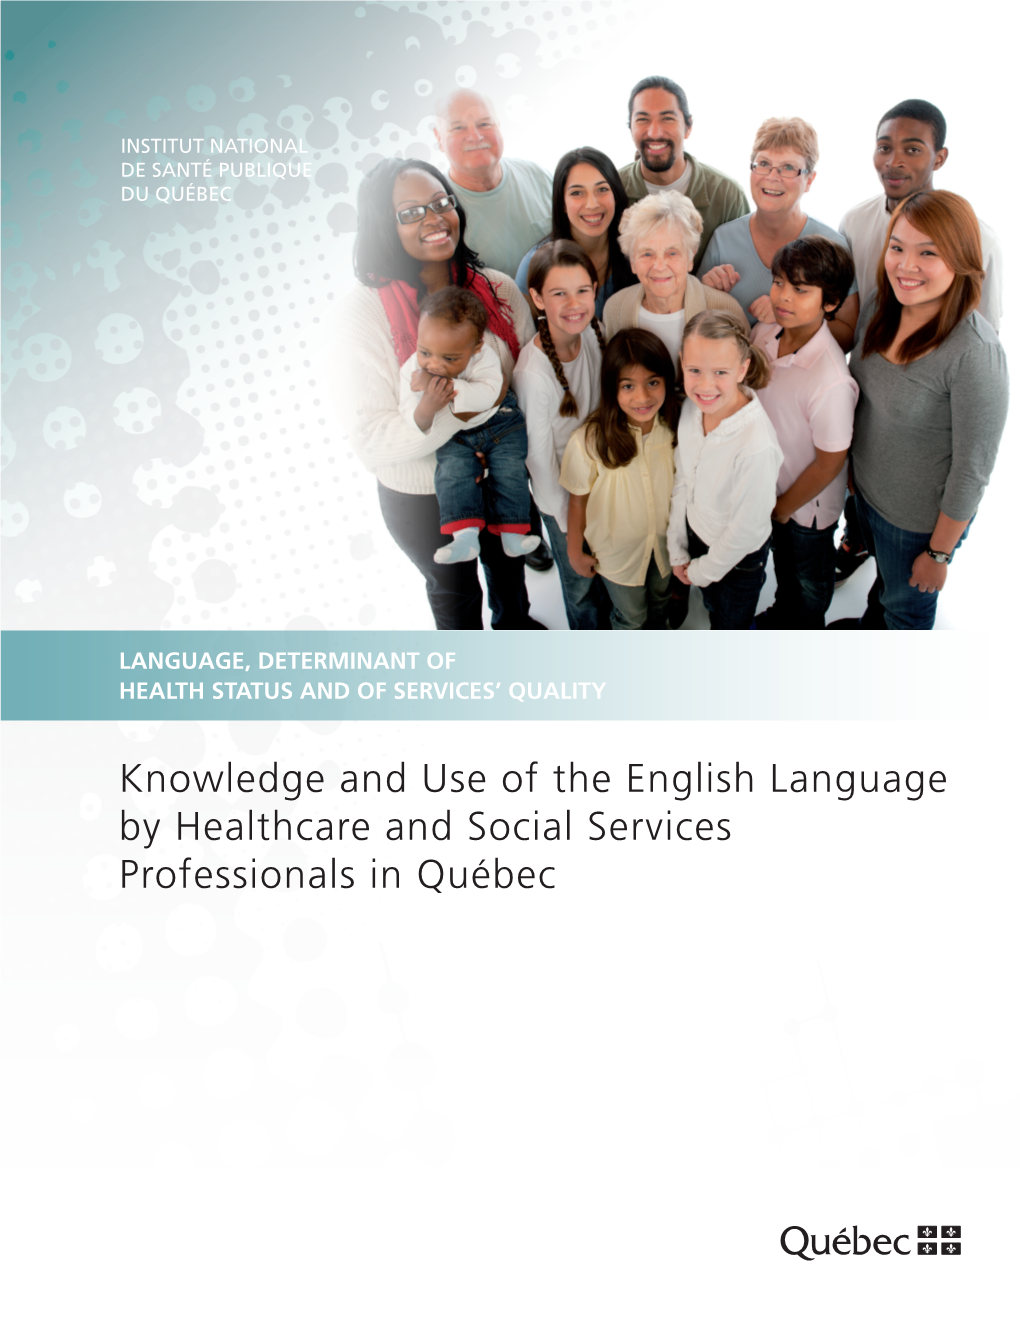 Knowledge and Use of the English Language by Healthcare